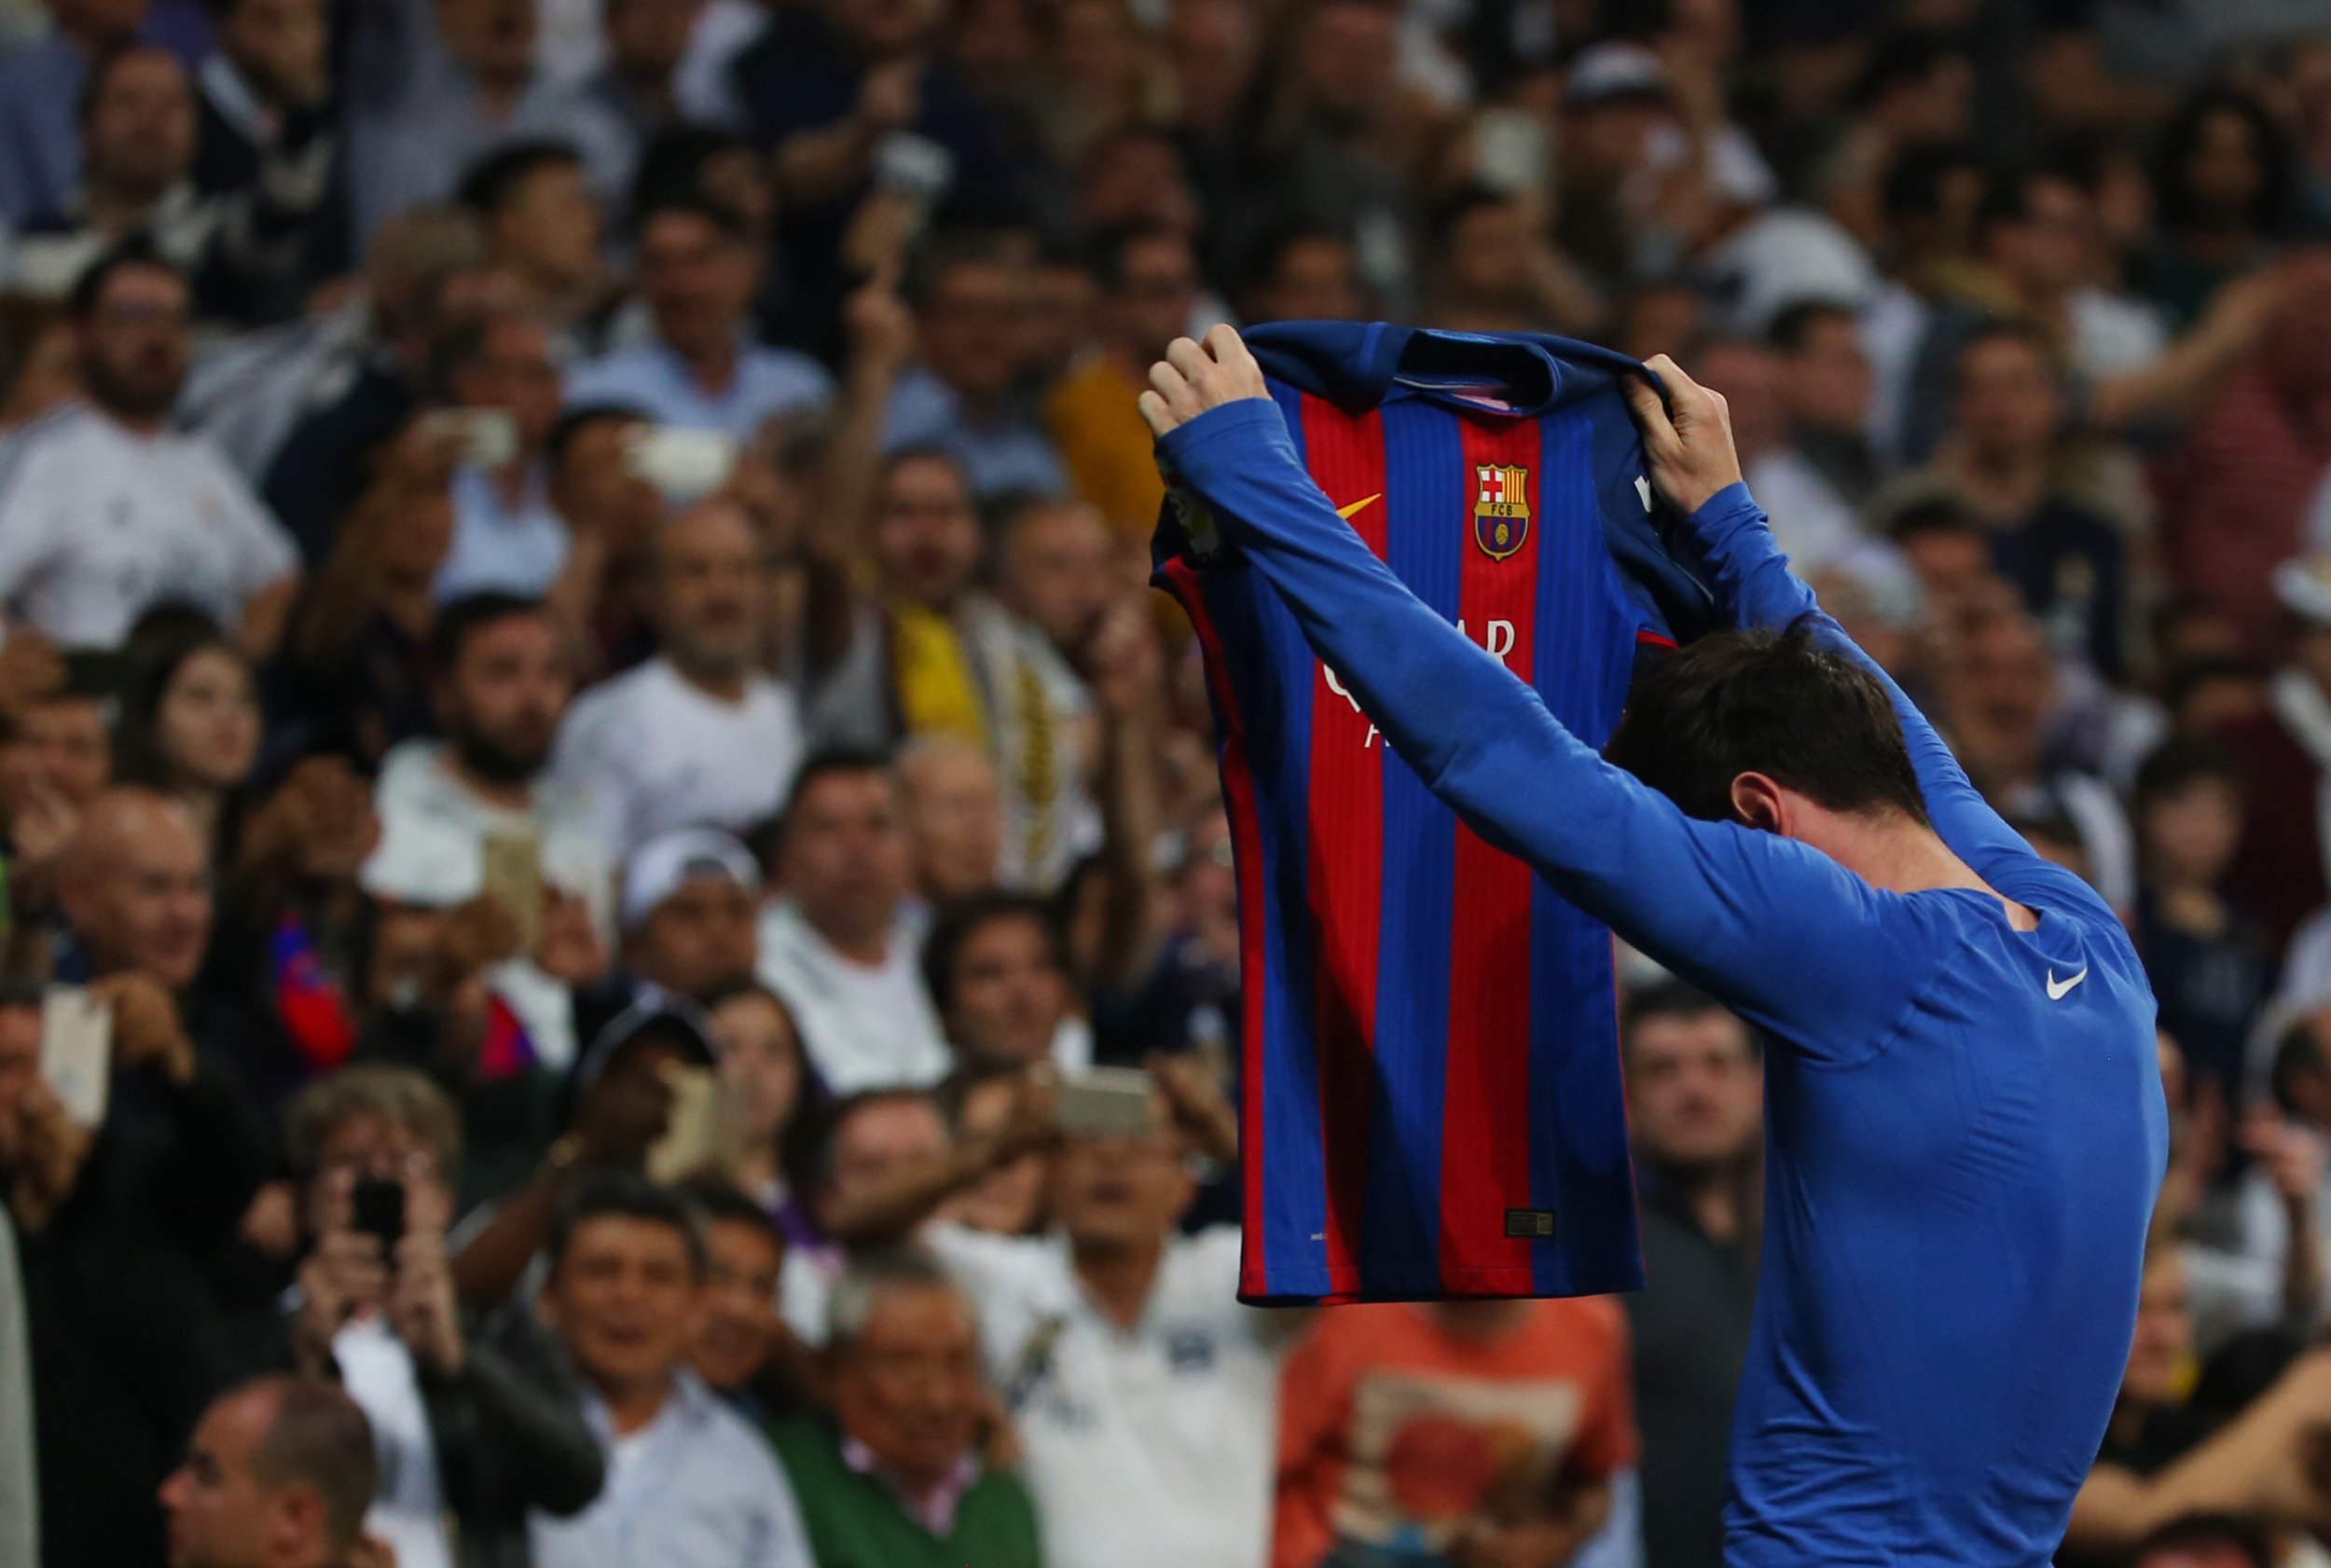 Barcelona: The enormous sum Messi's 500-goal shirt sold for at